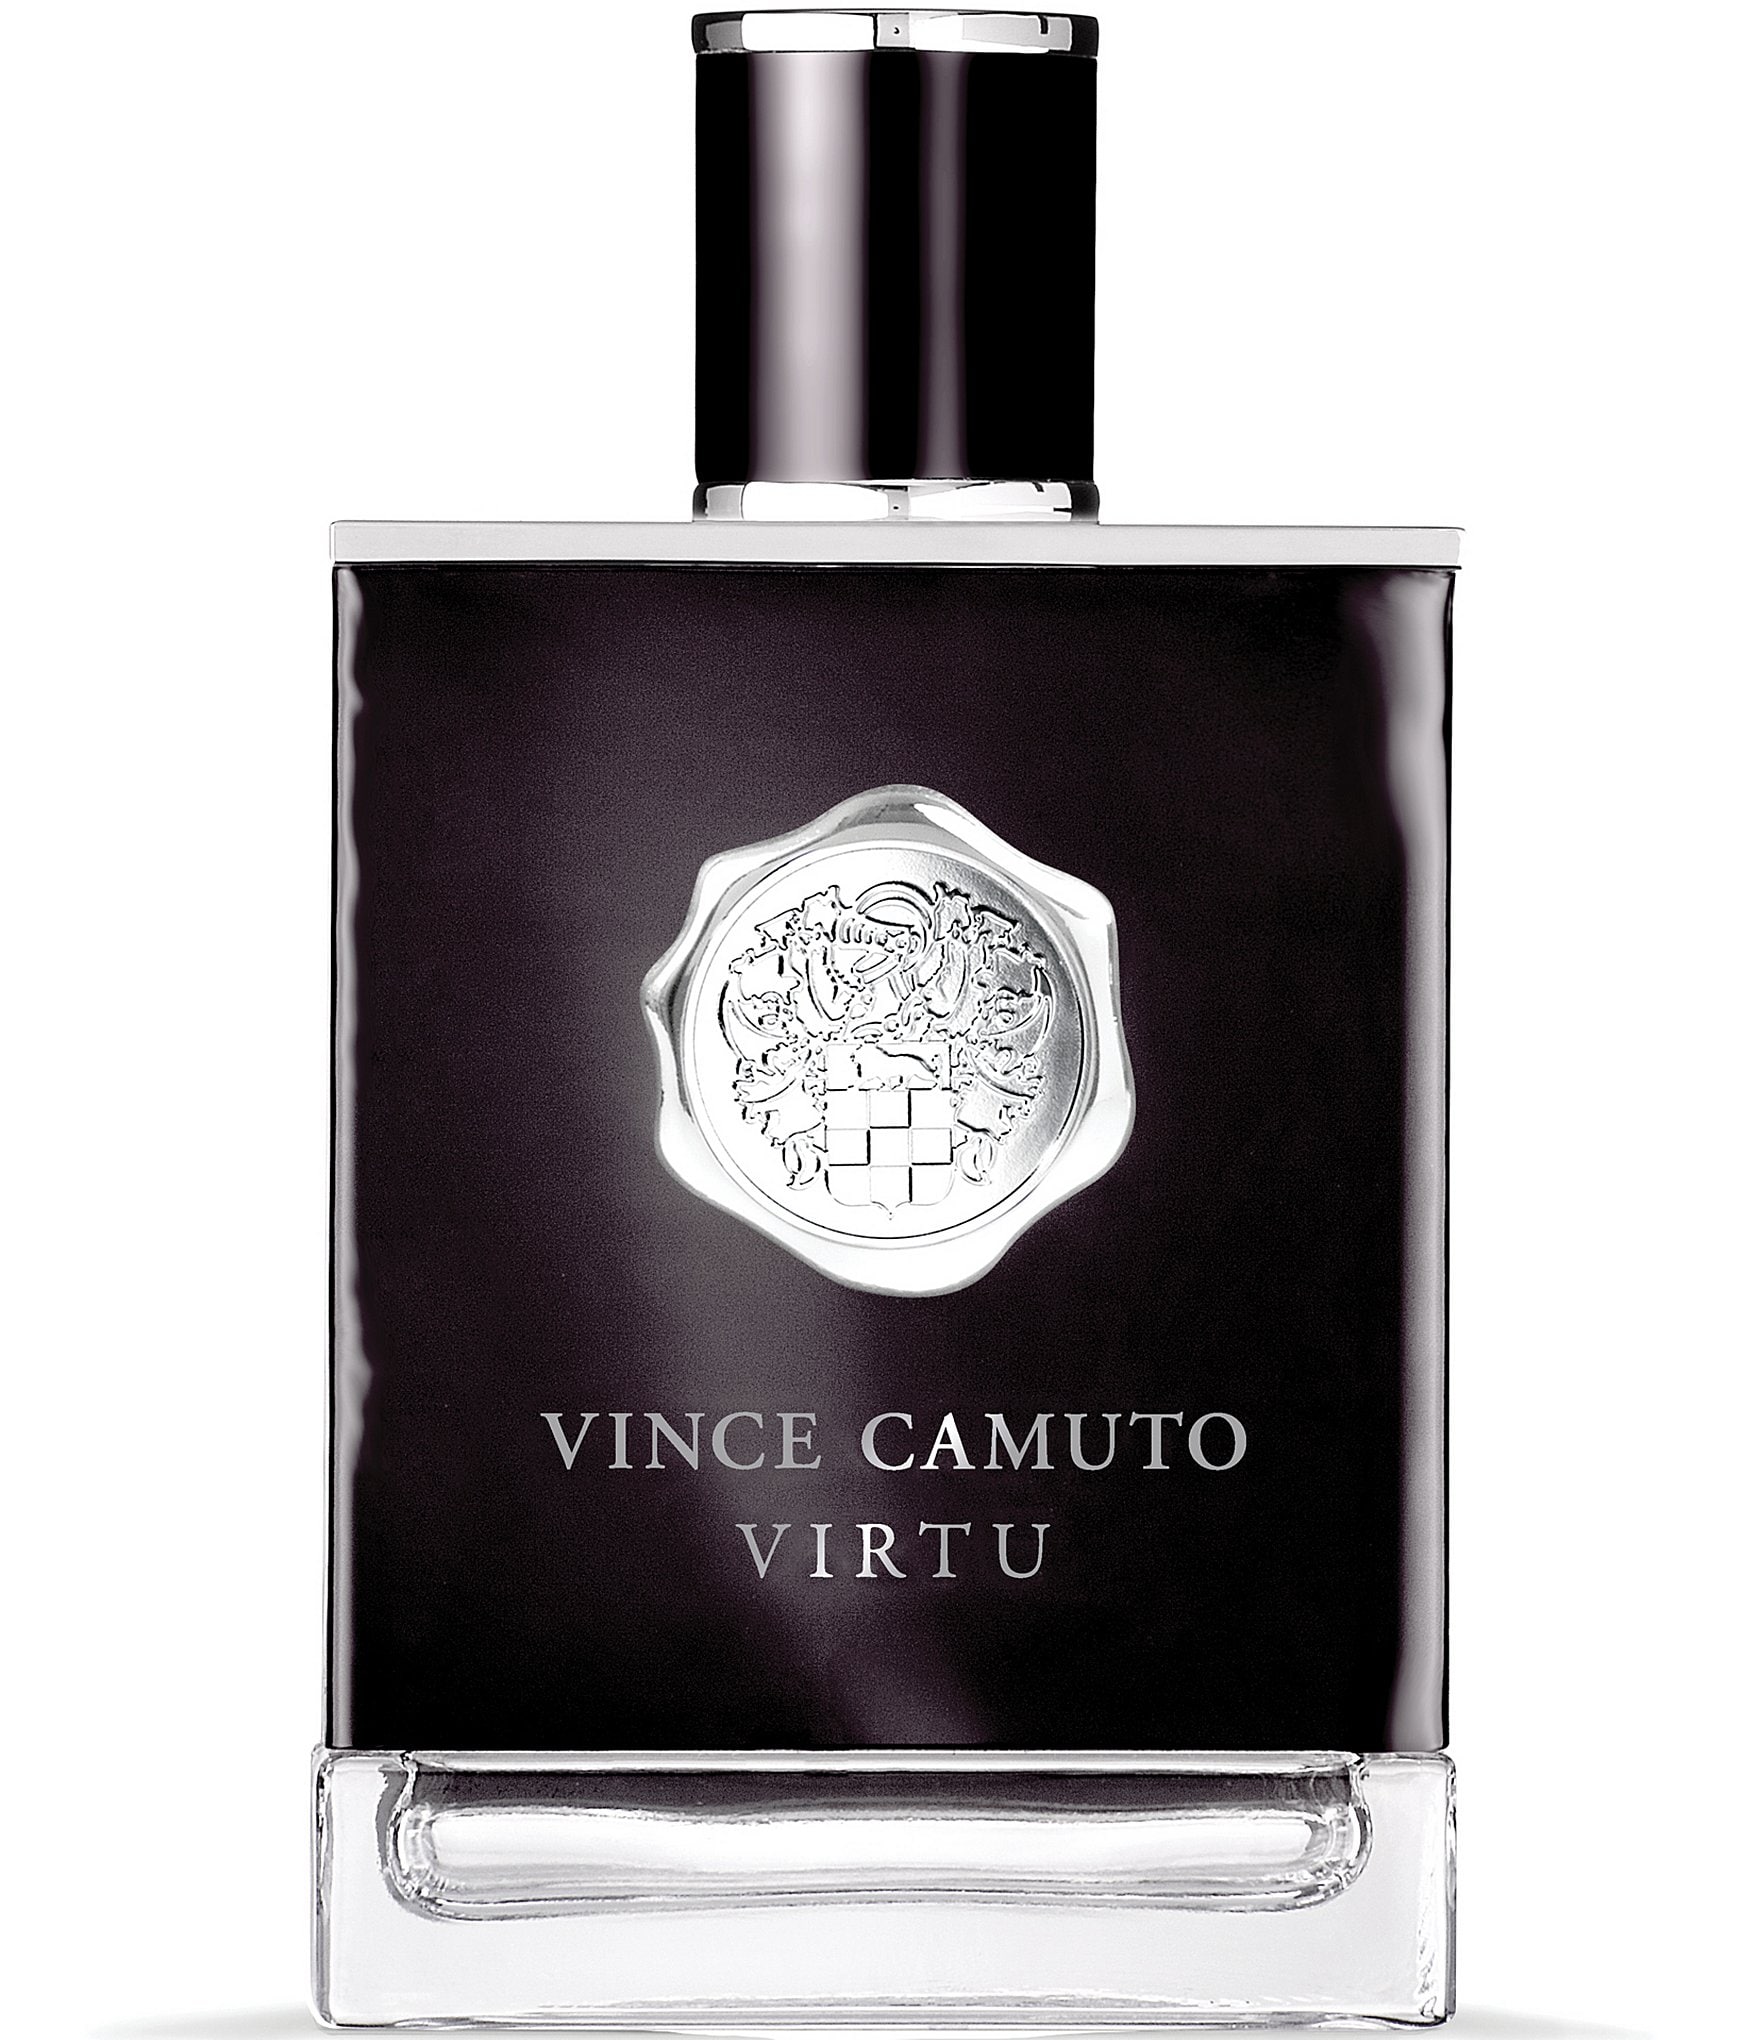 Vince Camuto: Mens's Cologne